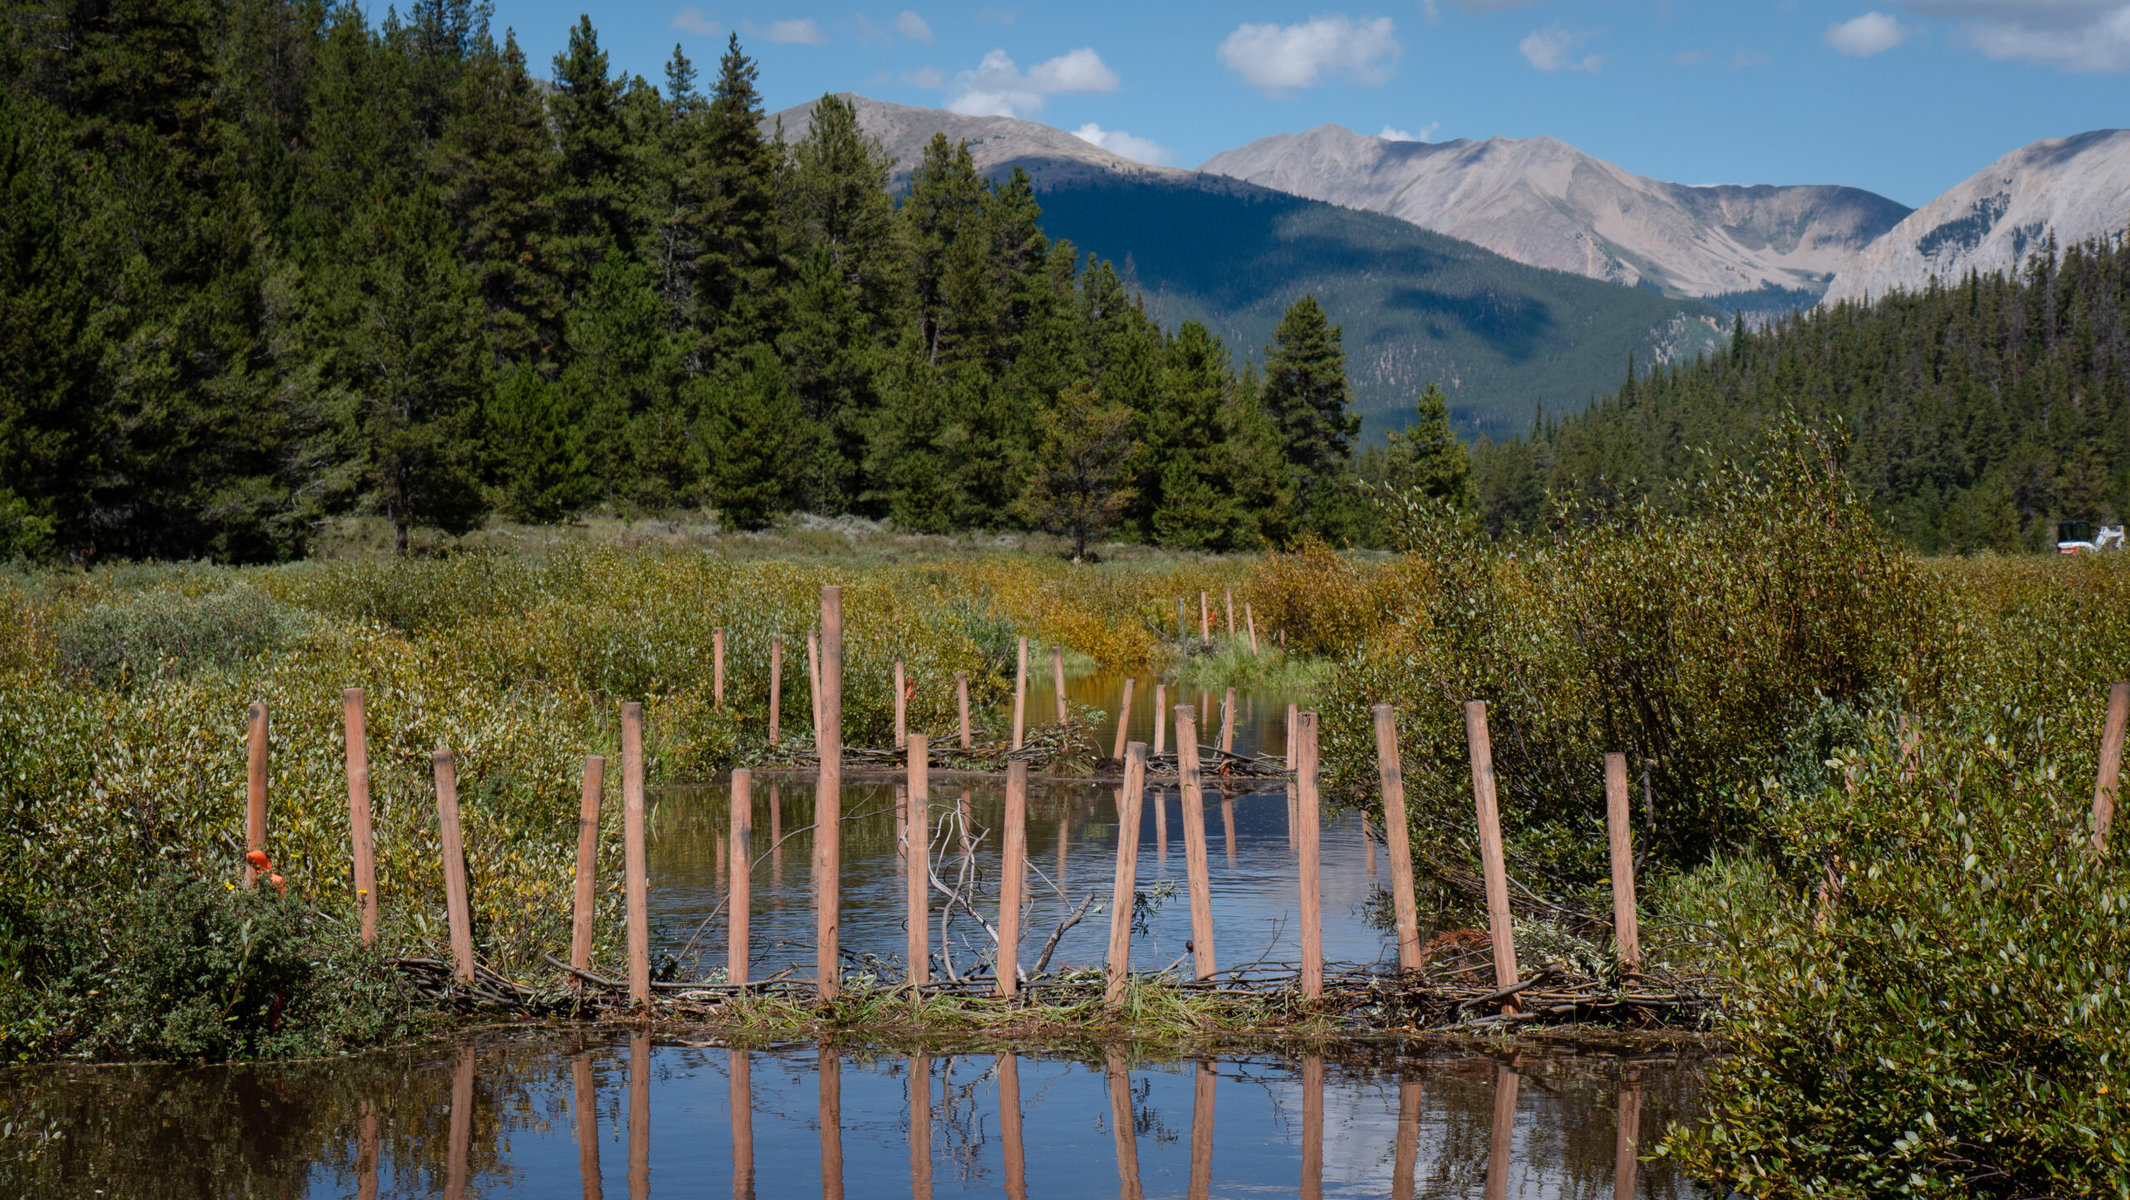 Beaver dam analogs with mountain views near Crested Butte, Colorado.